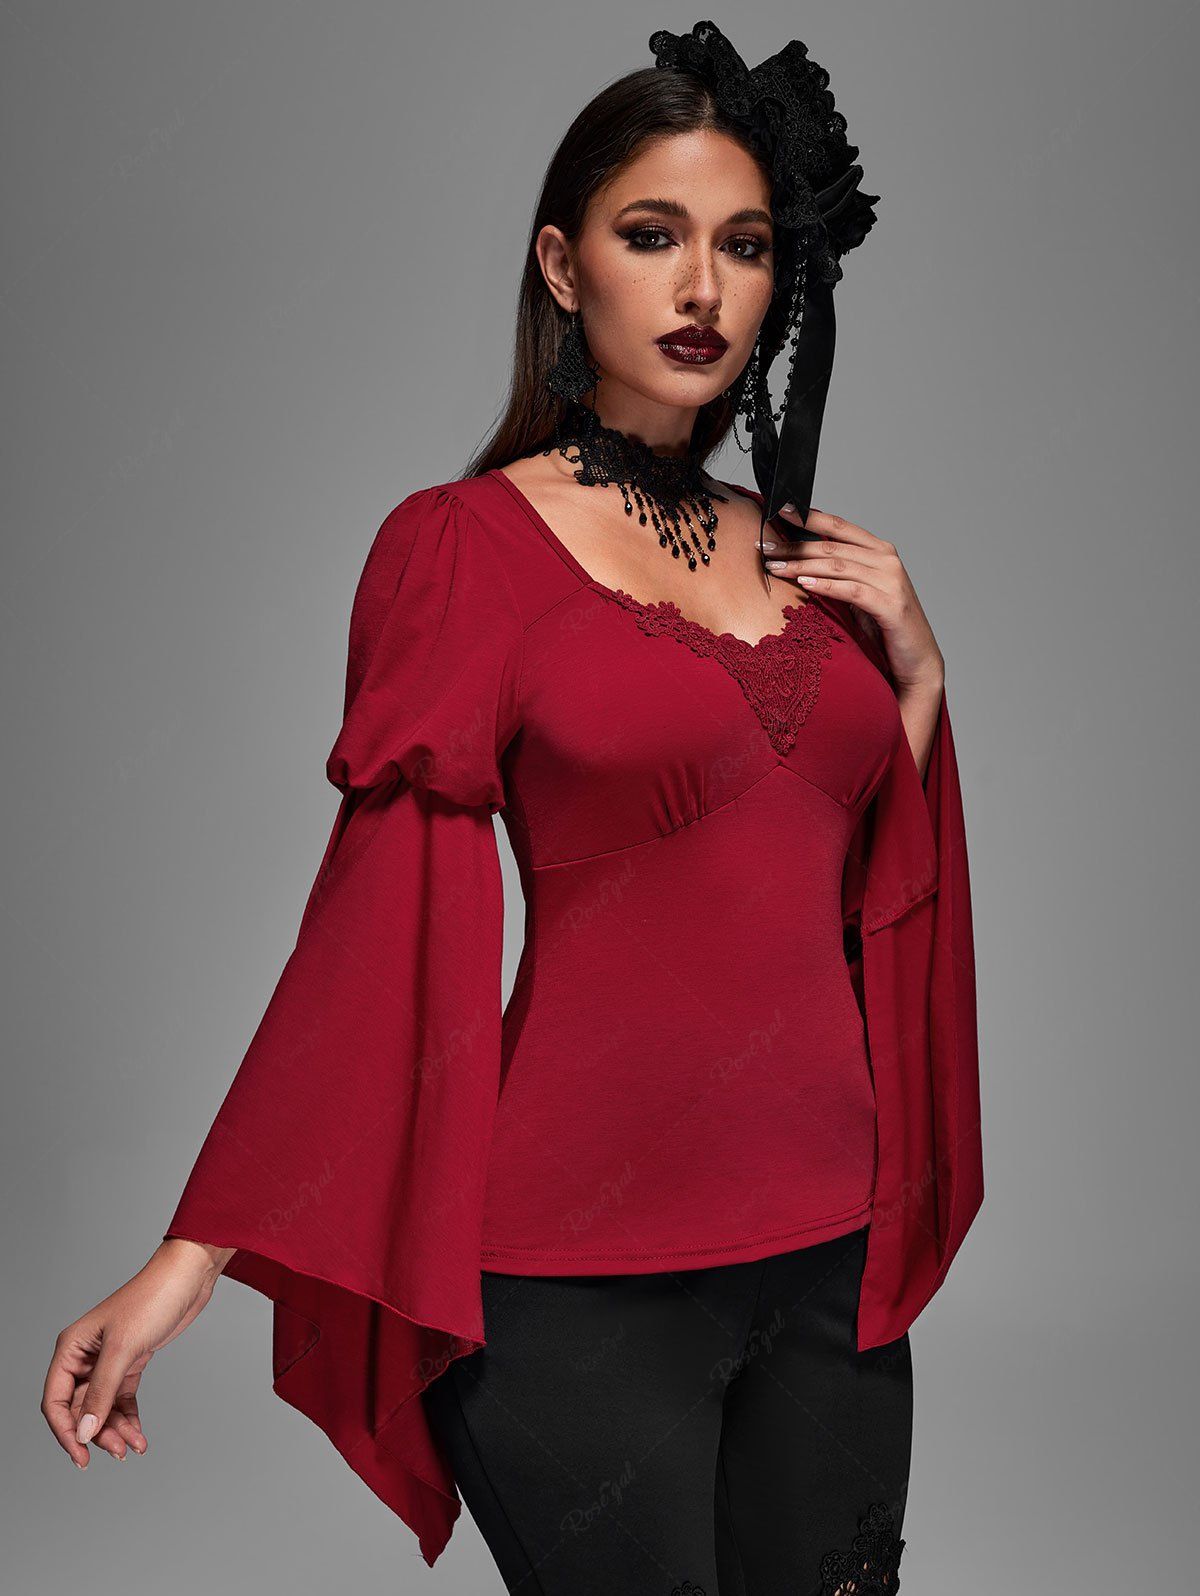 Gothic Valentine's Day Ruched Heart Shaped Appliques Flare Sleeves Top